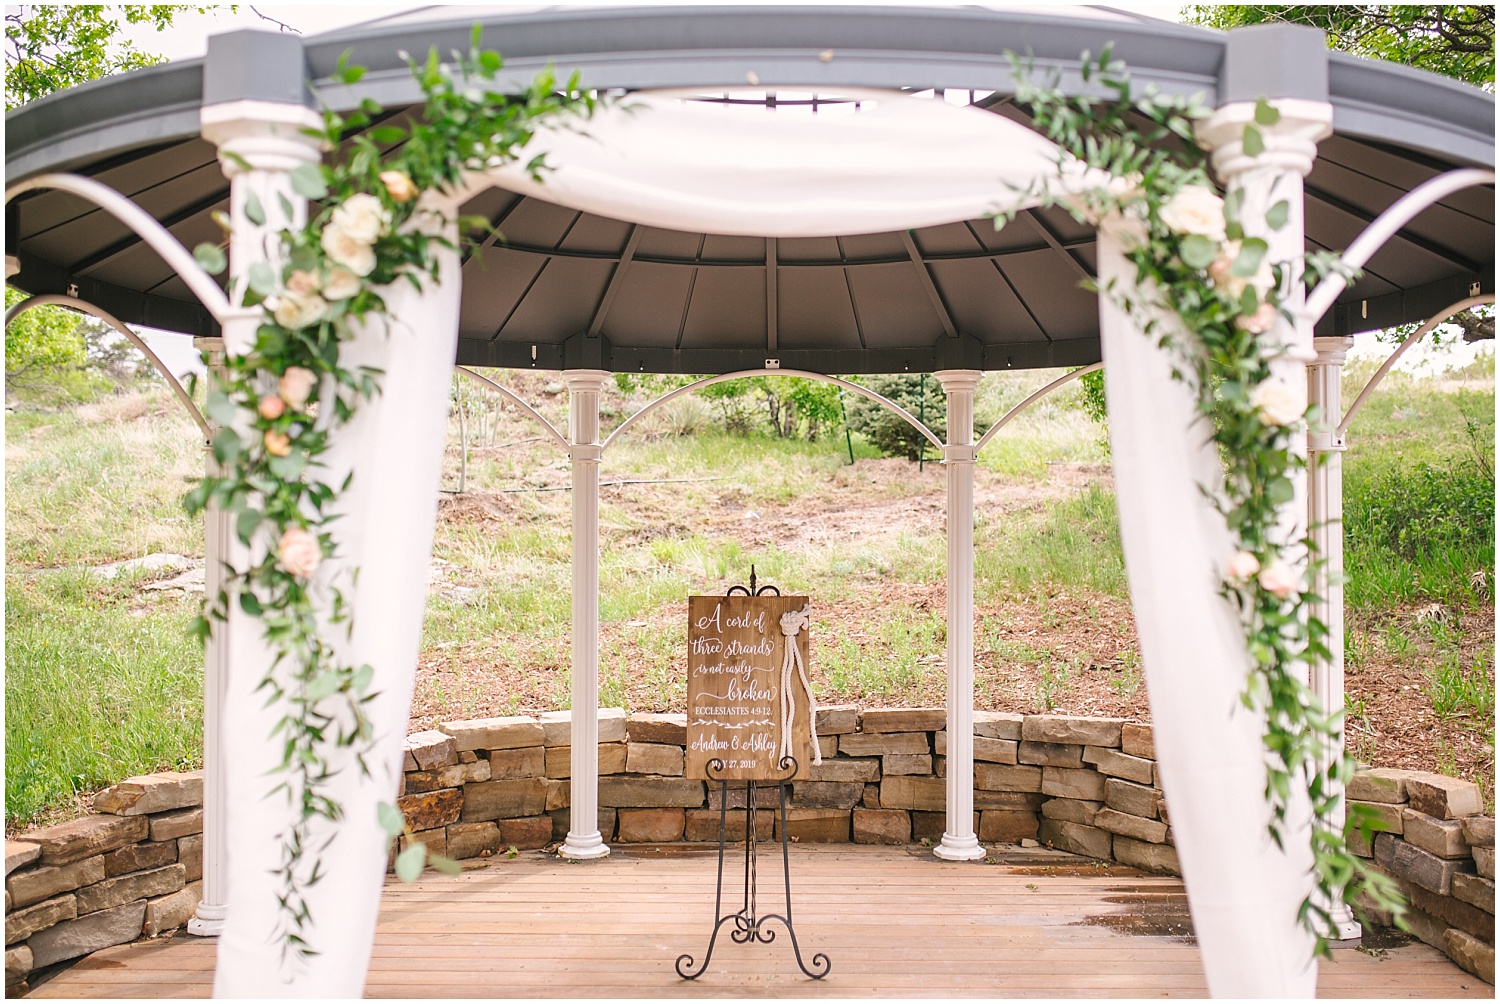 Creekside Event Center wedding ceremony gazebo with white drapery and lots of greenery